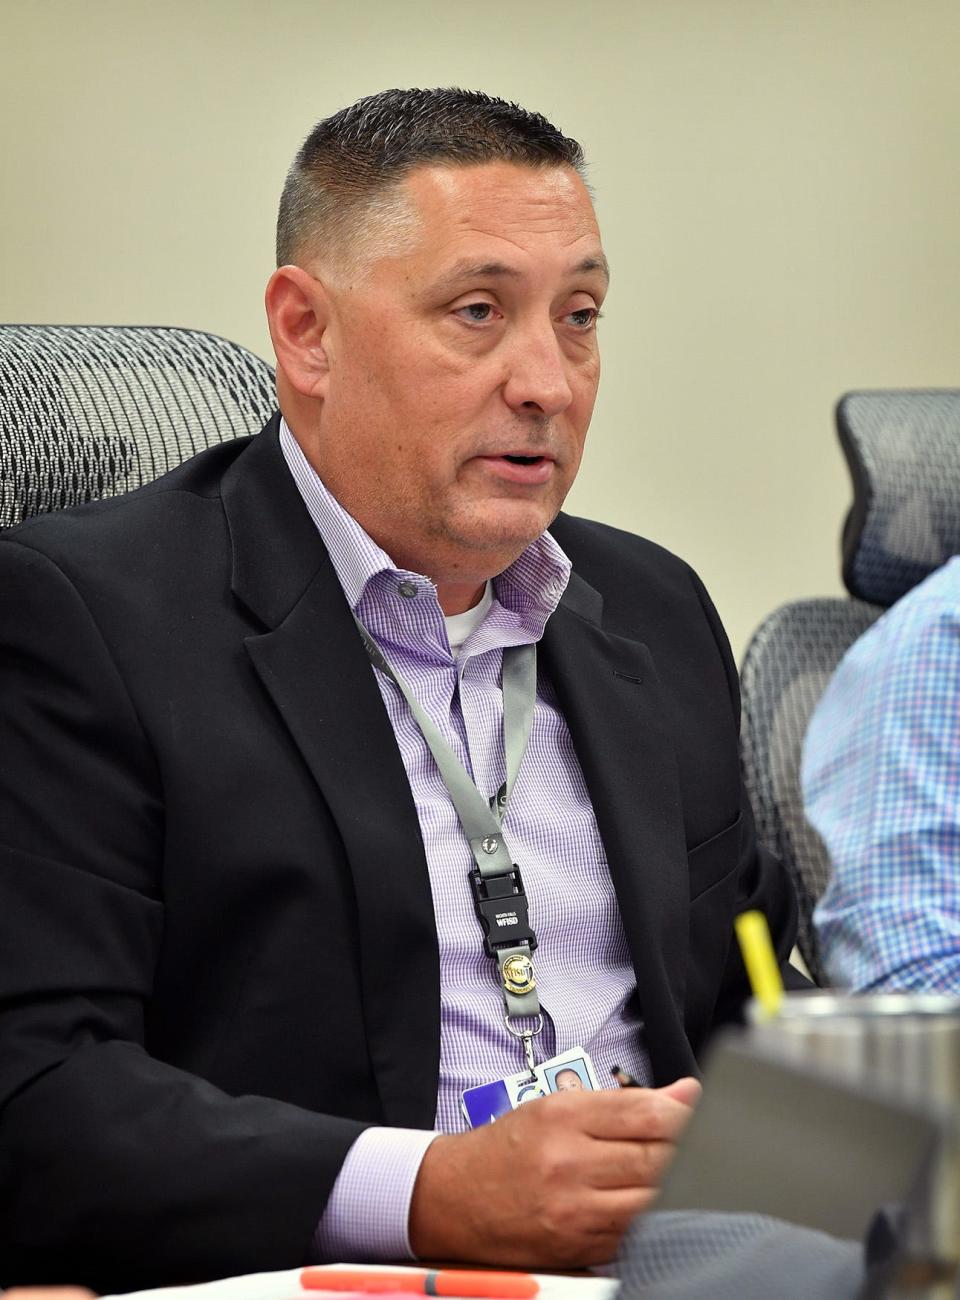 Wichita Falls ISD Superintendent Michael Kuhrt addresses the Board of Trustees during a special session July 13, 2021, as shown in this file photo.